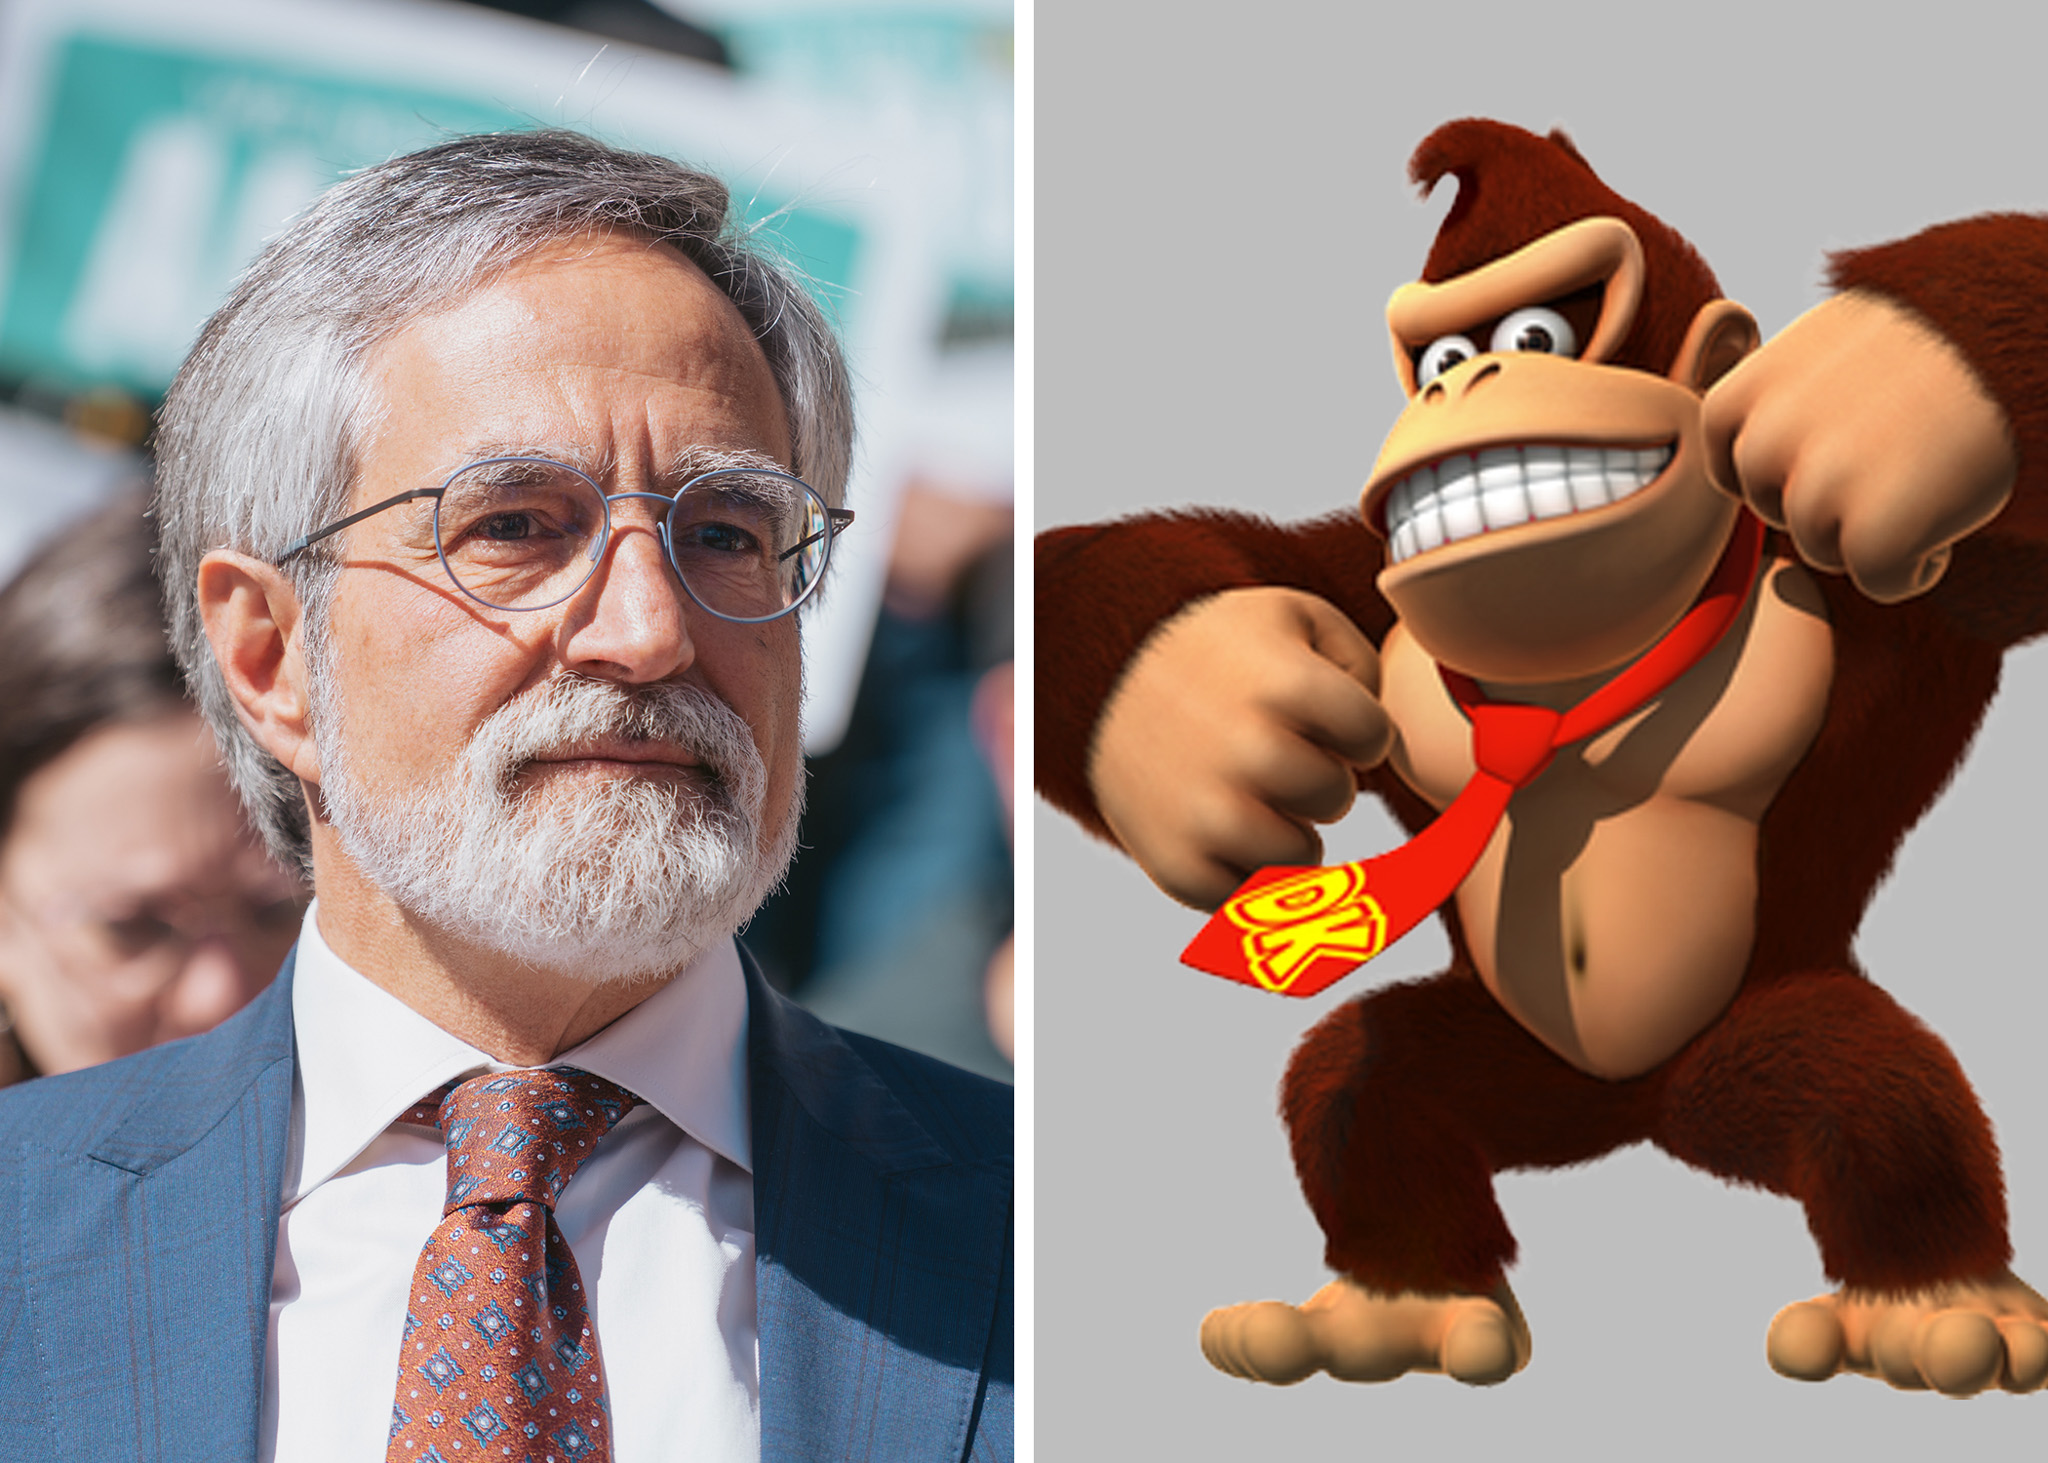 The image is split in half. The left shows a man with gray hair, glasses, a beard, a suit, and a patterned tie. The right shows Donkey Kong, a muscular, brown gorilla wearing a red tie.